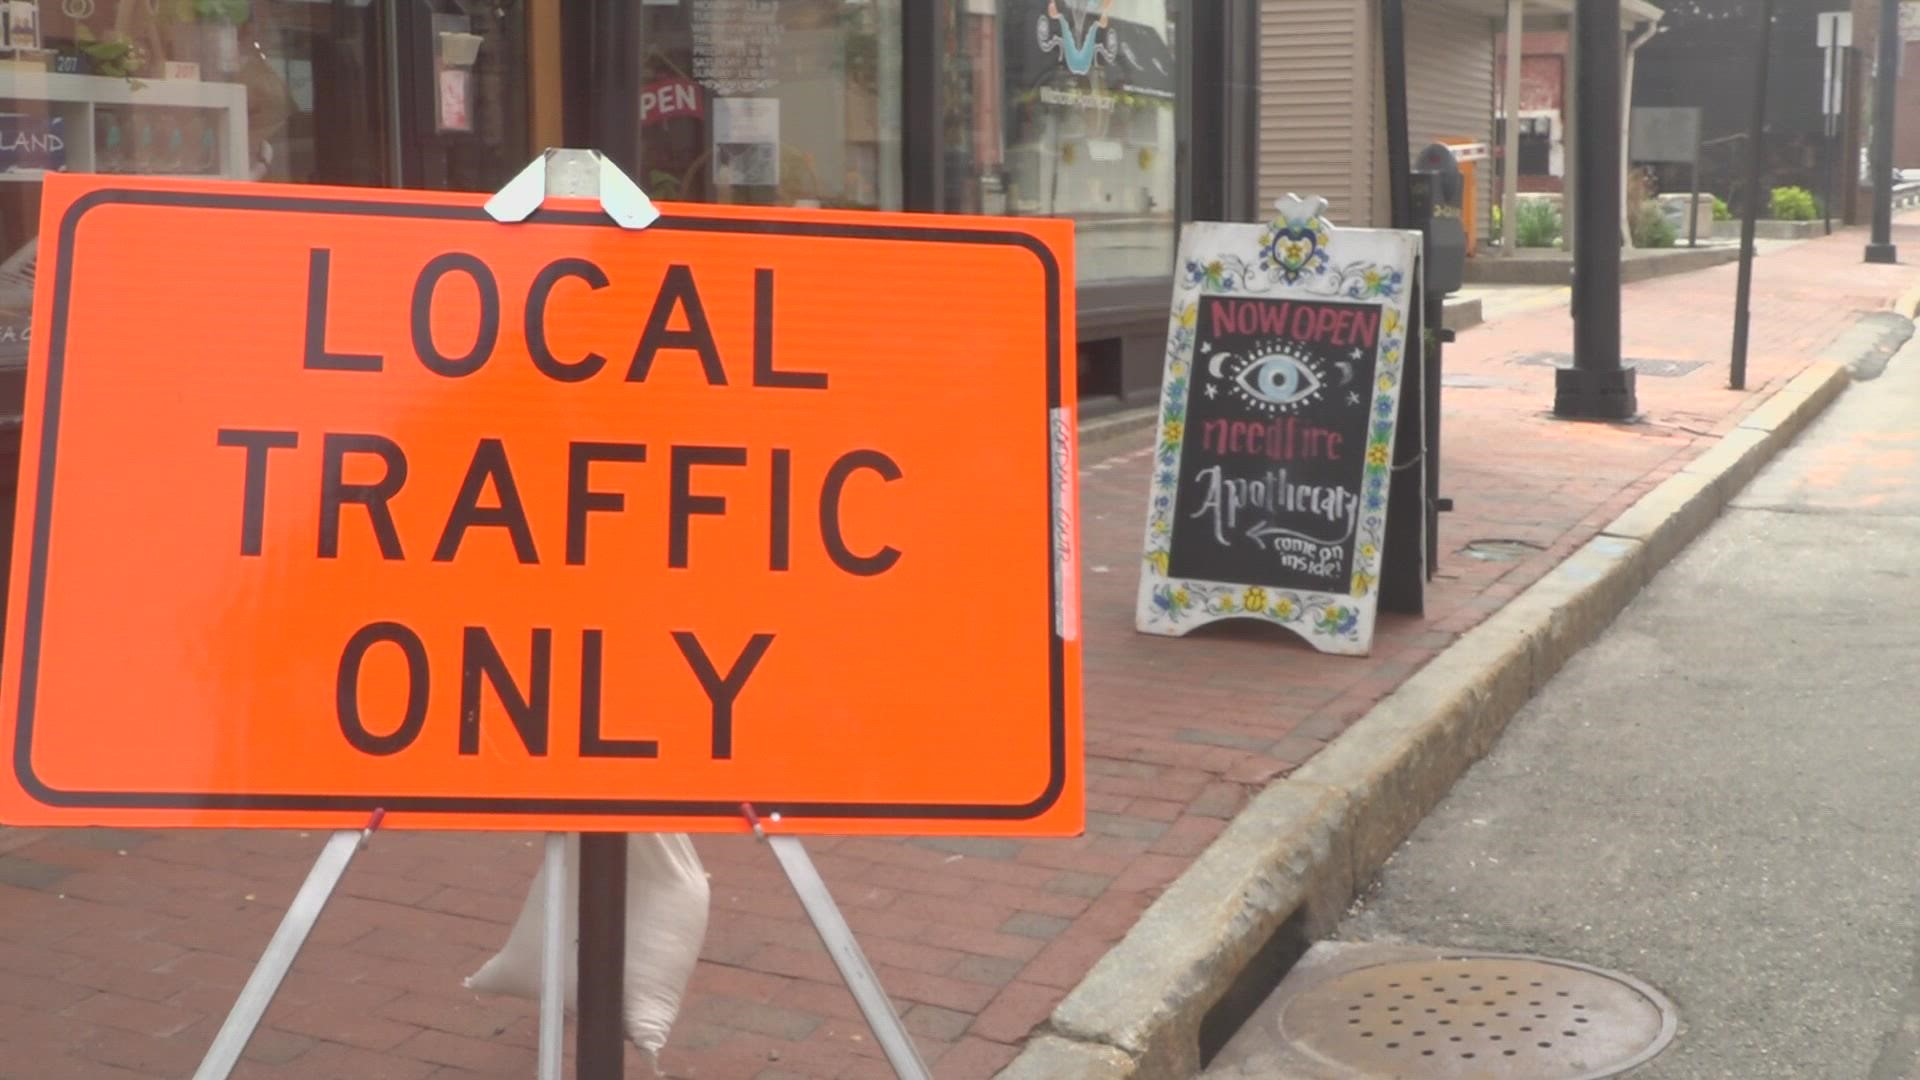 For more than 5 weeks, the construction project has blocked car traffic on the first block of Free Street and access to several bars, boutiques, and salons.